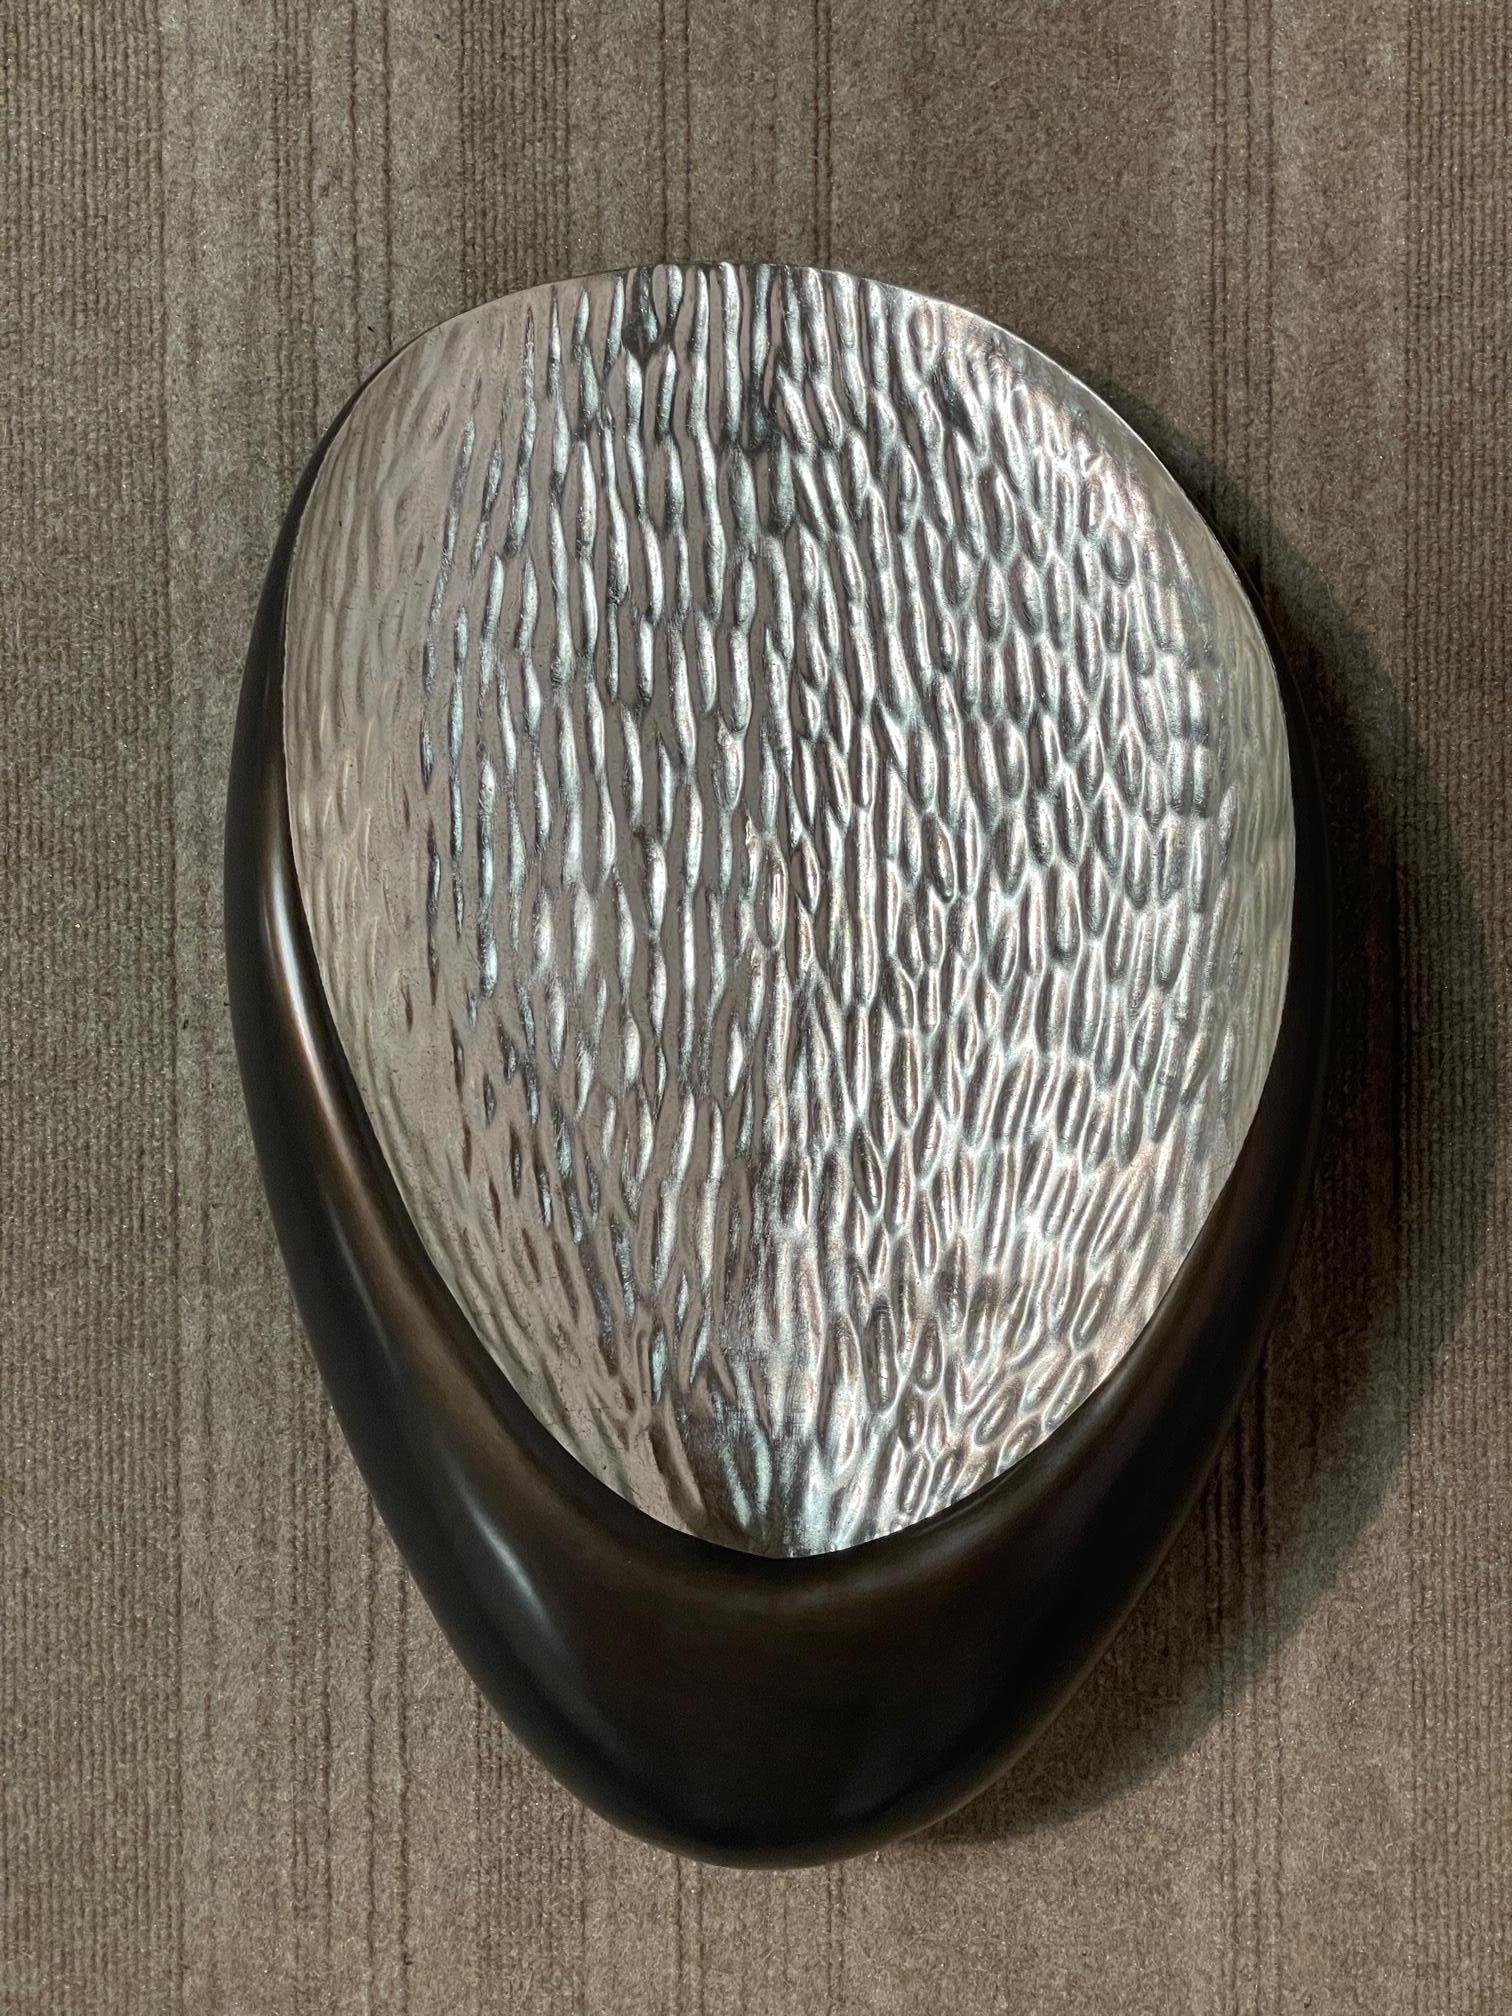 Jean de Merry's Hanna wall sconce is formed from a single hand-carved piece of wood that is painstakingly textured on the interior and smoothed on the exterior.  An almost oceanic presence prevails amidst the sparkling white gold interior contrasted